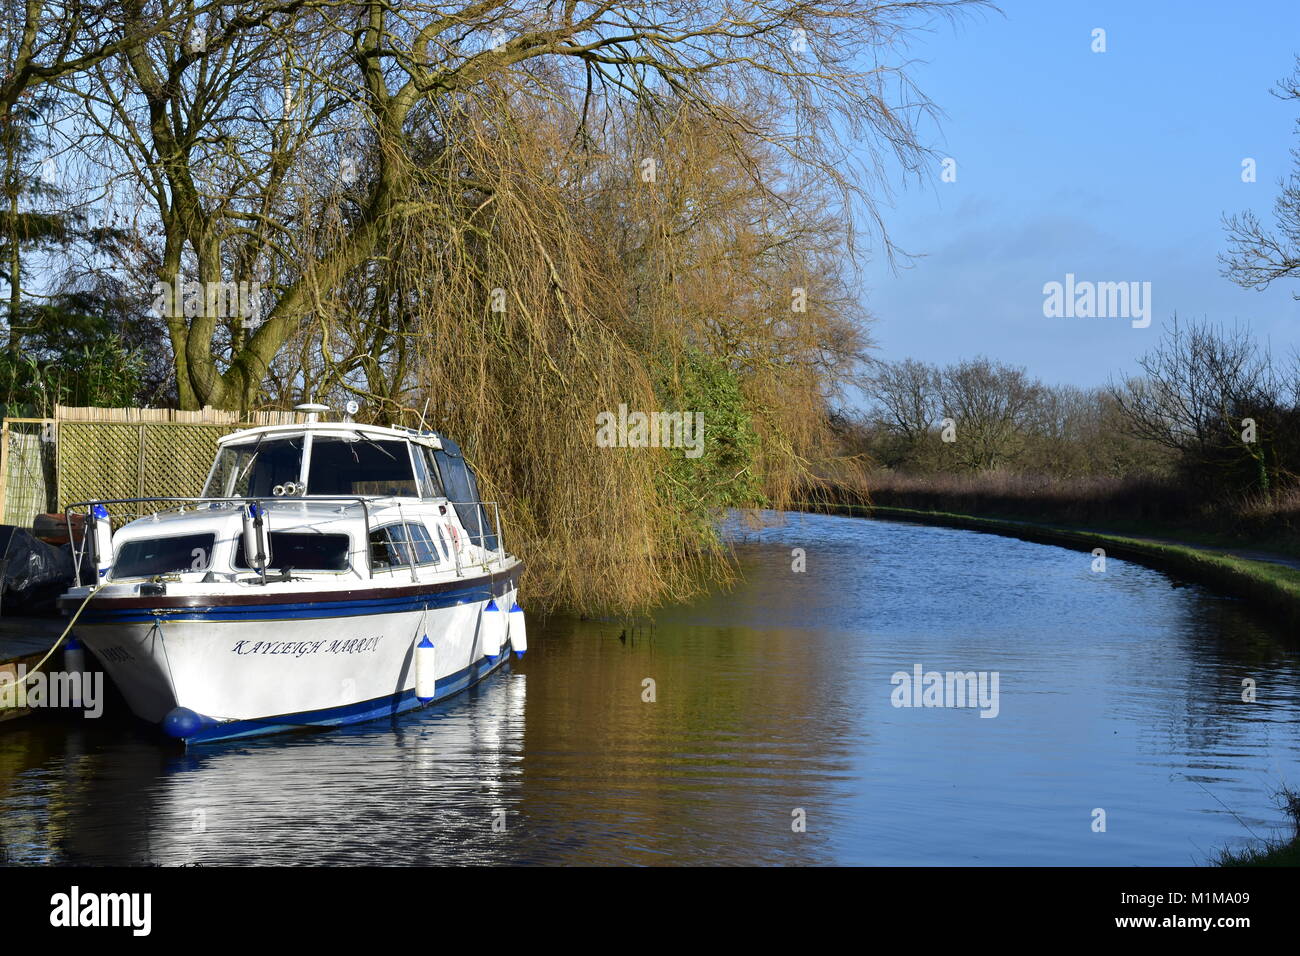 lancaster canal, preston with canal boat Stock Photo